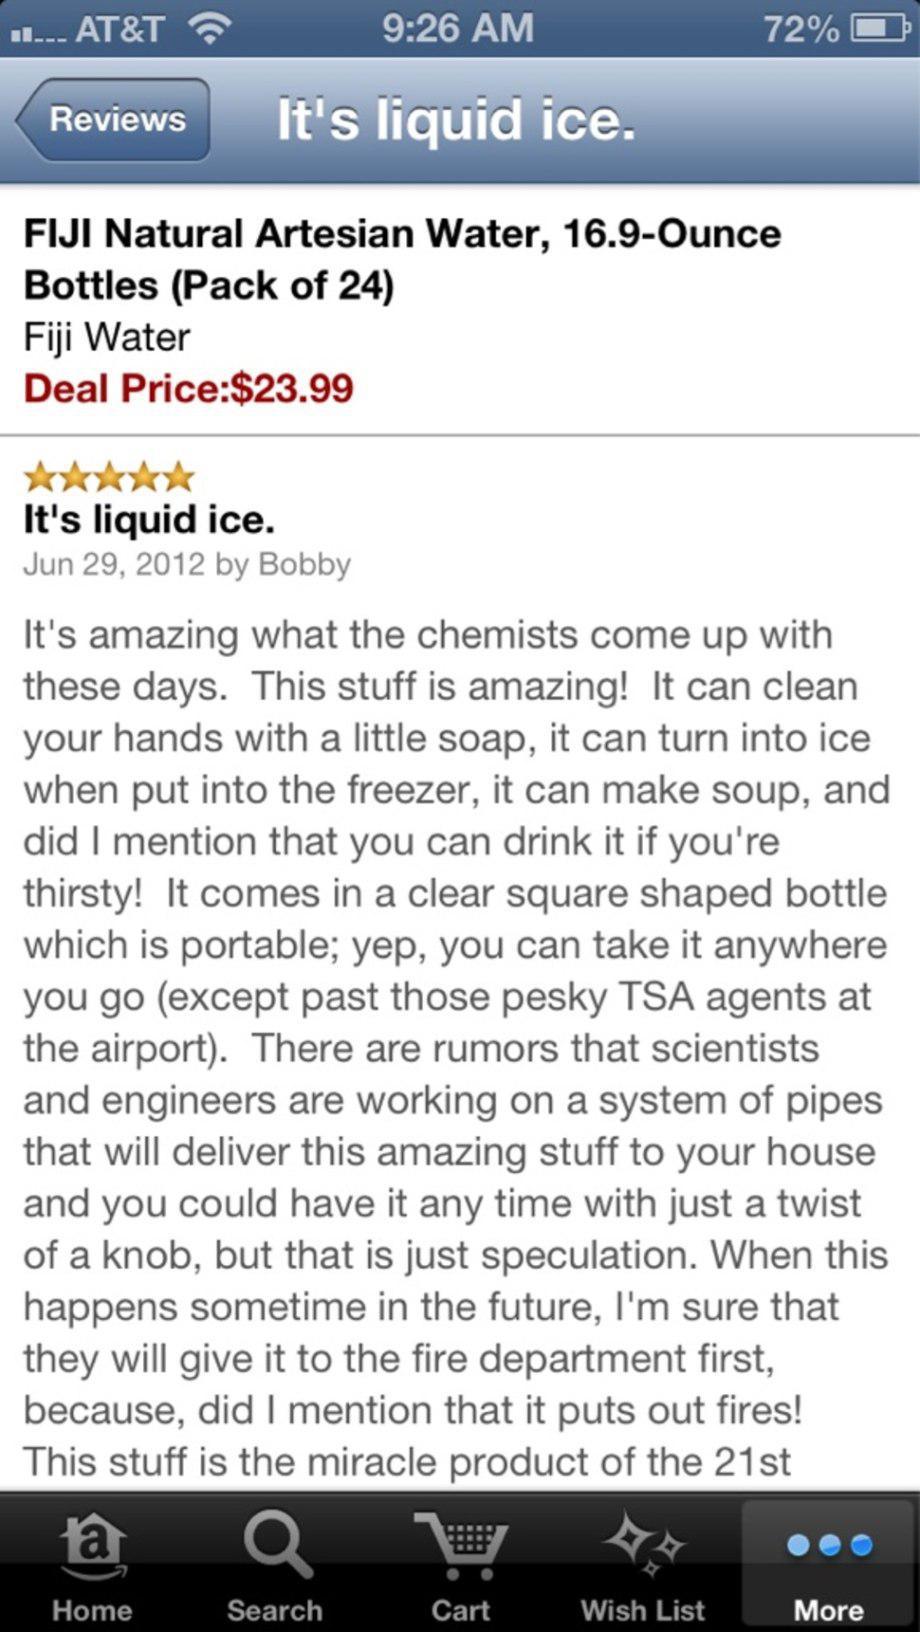 amazon reviews - screenshot - 72% ...At&T Reviews It's liquid ice. Fiji Natural Artesian Water, 16.9Ounce Bottles Pack of 24 Fiji Water Deal Price$23.99 It's liquid ice. by Bobby It's amazing what the chemists come up with these days. This stuff is amazin